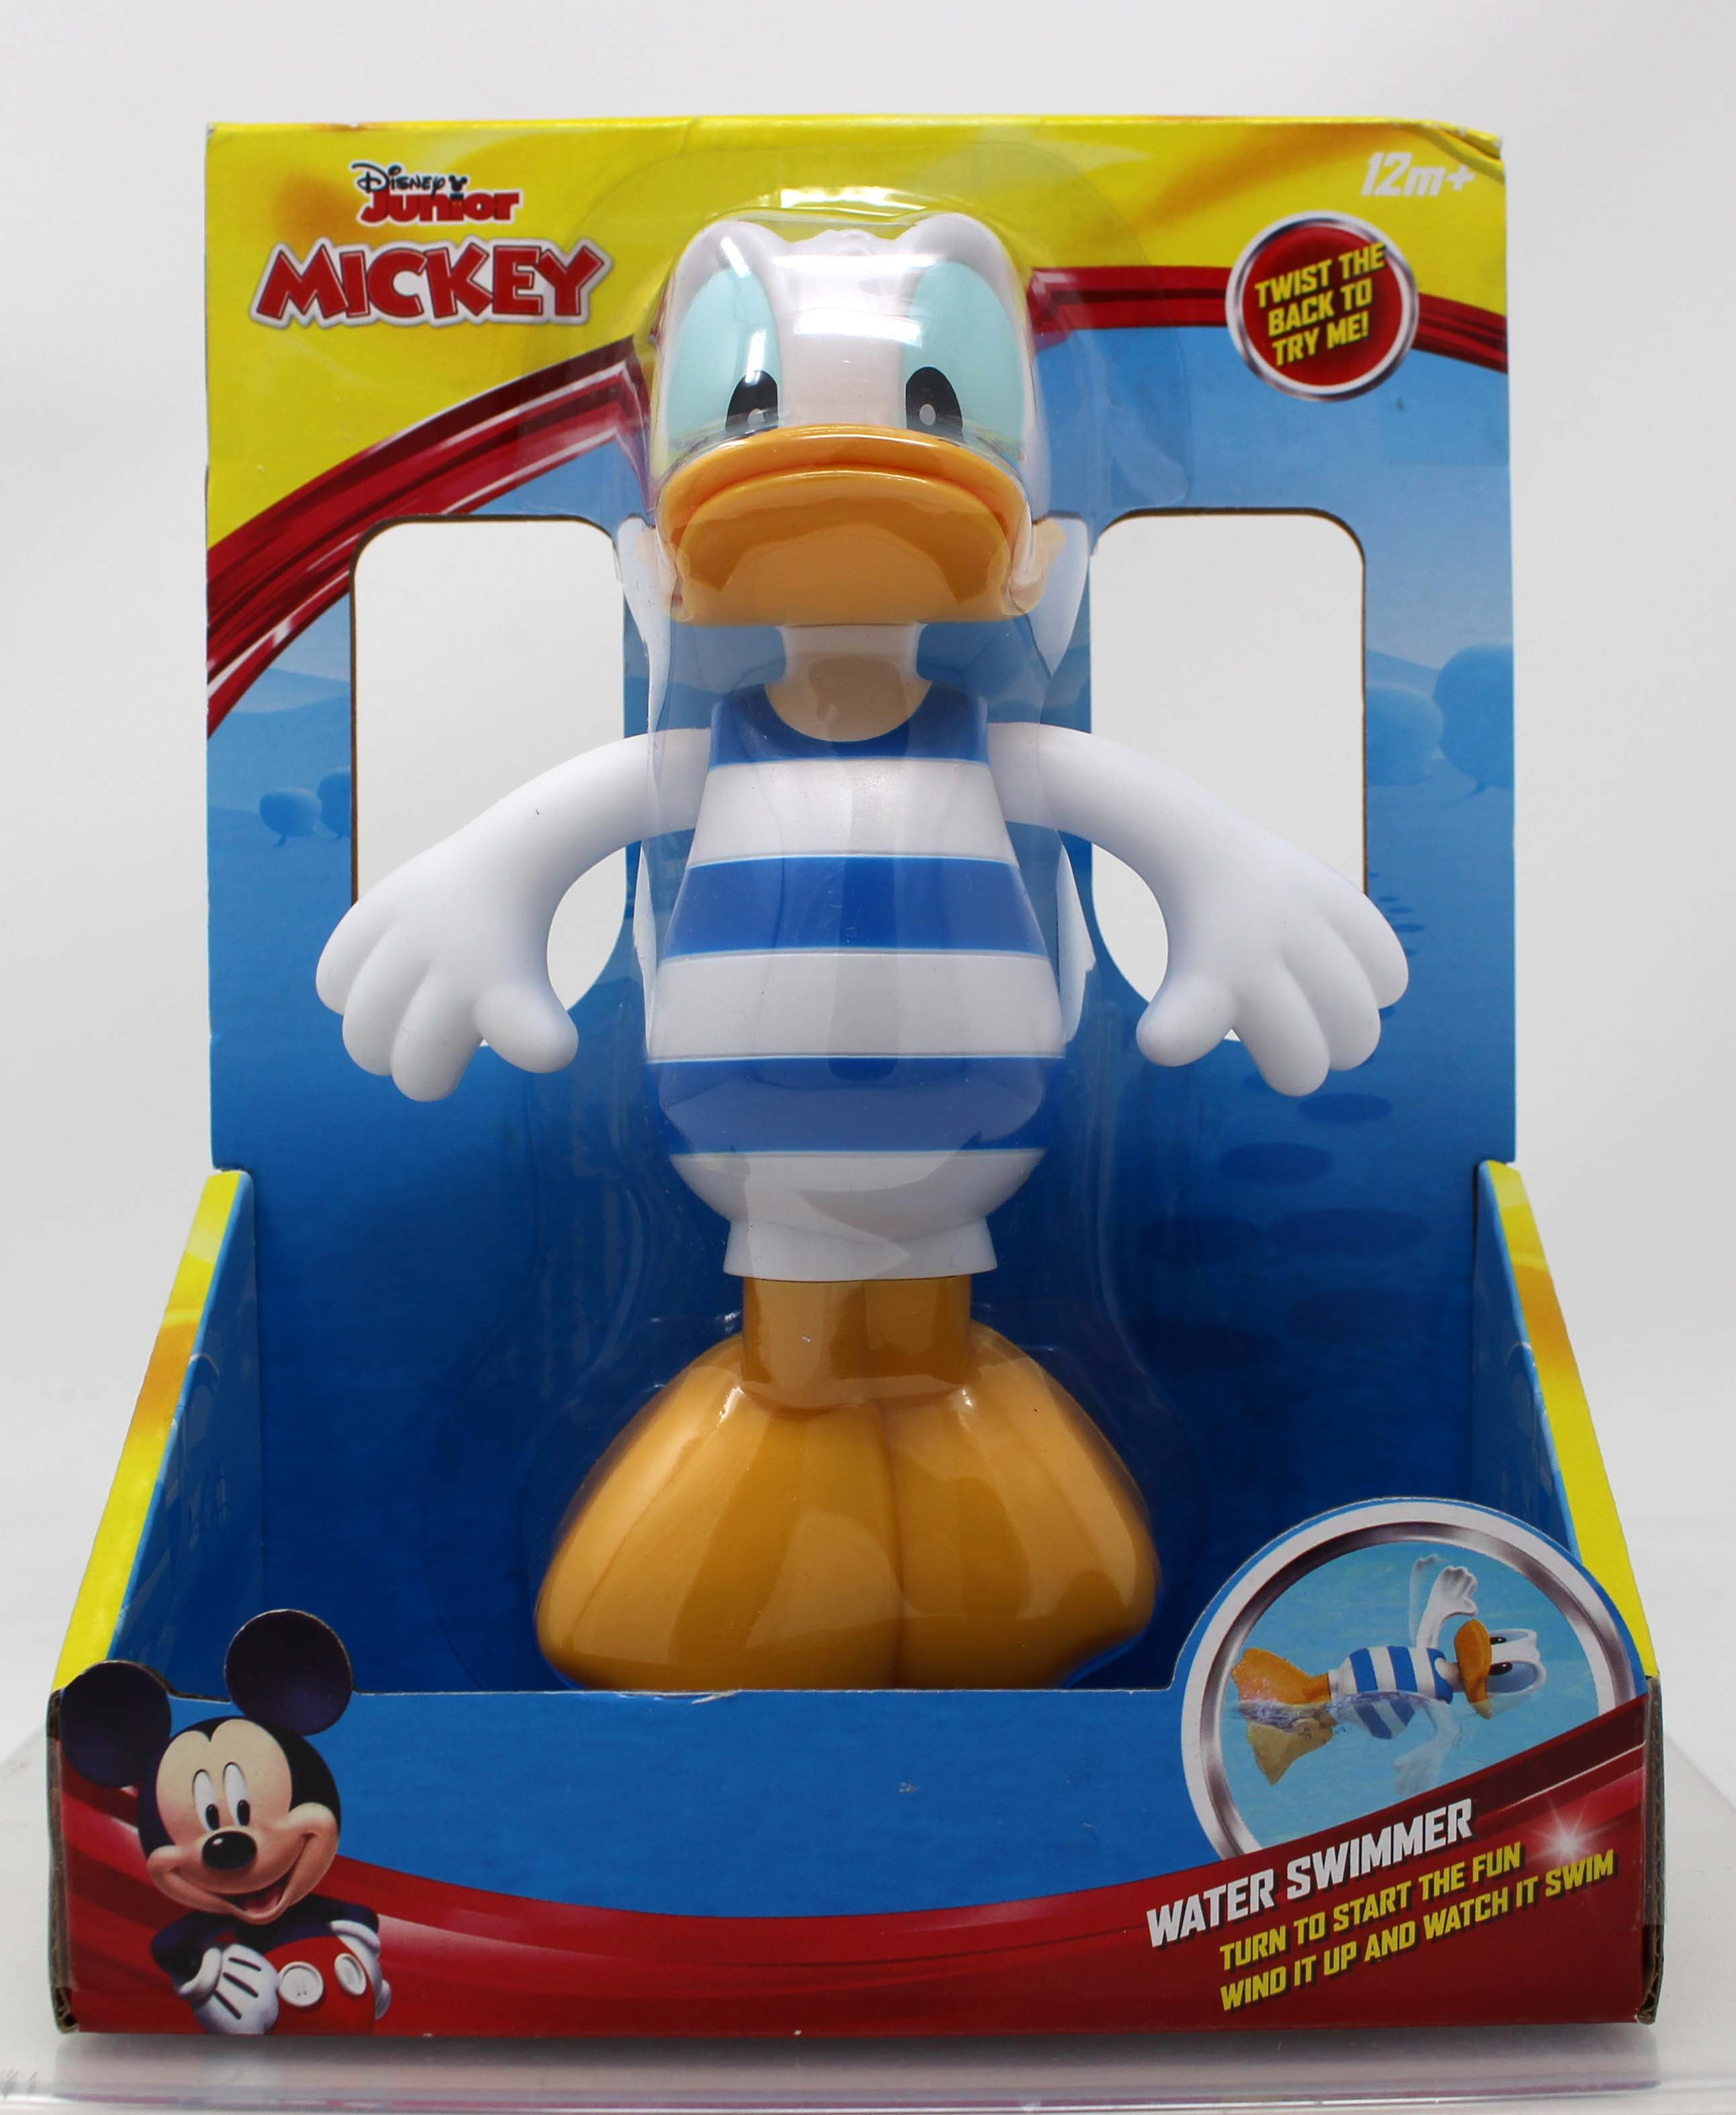 Disney Mickey Mouse Clubhouse Mickey Mouse Water Swimmer Bath Pool Tub New! 